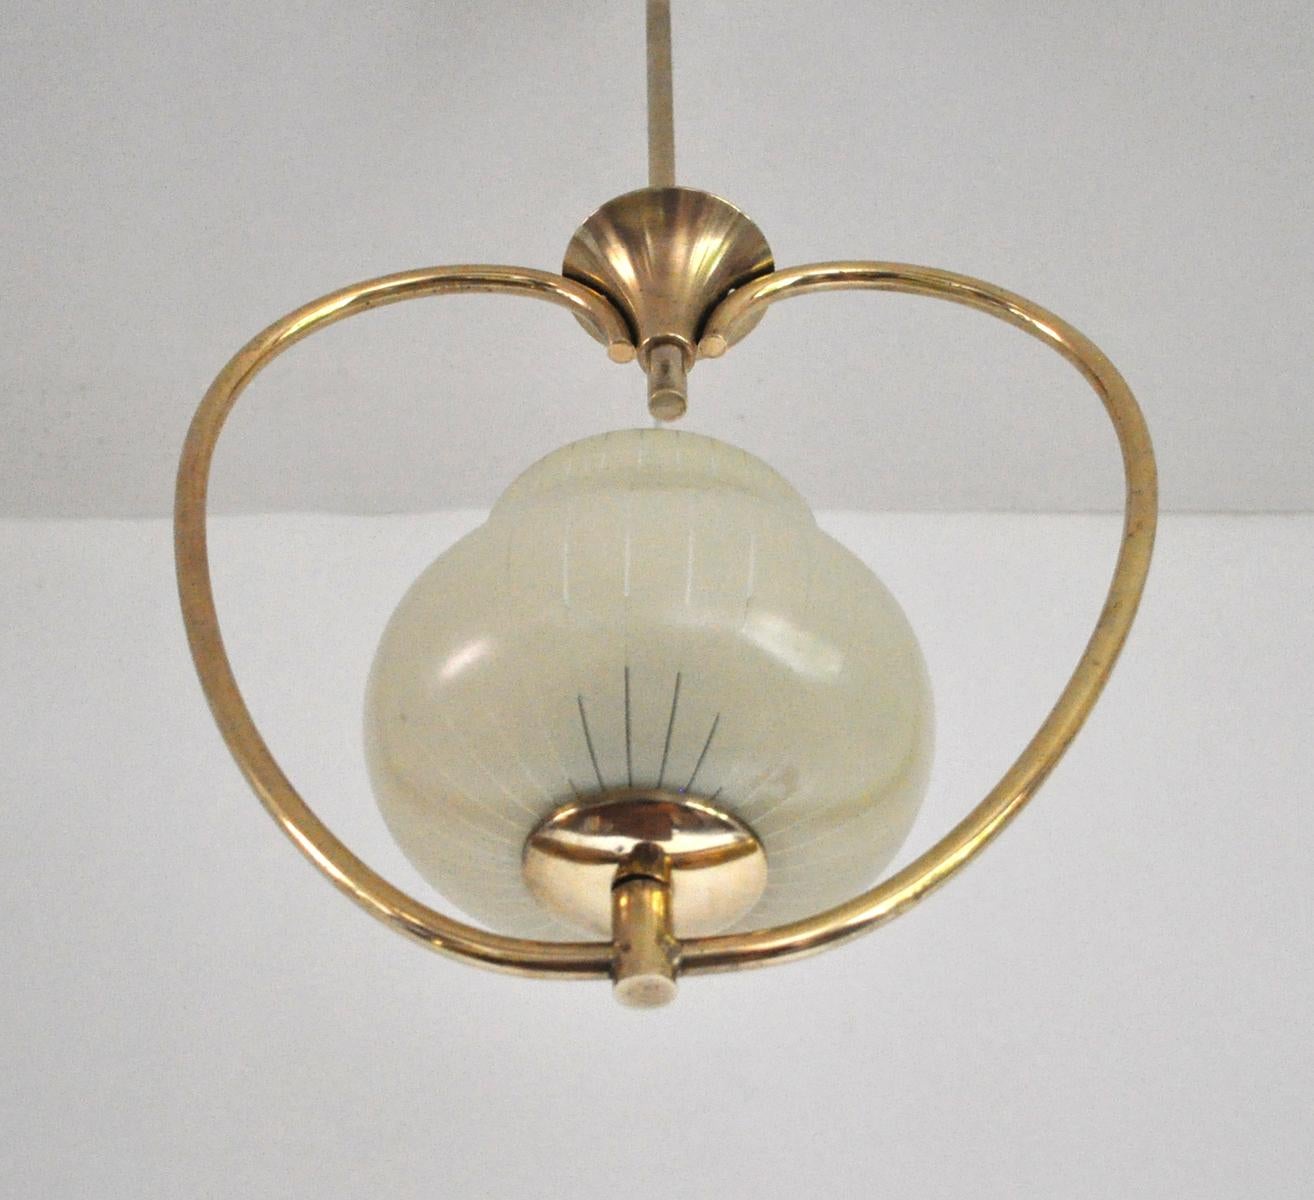 Brass and etched glass Art Deco pendant light with the original canopy.
Probably produced in Sweden in the 1930s.
Fine vintage condition, signs of wear consistent with age and use.

Light source: E27 Edison screw fitting, rewired.
Full height: